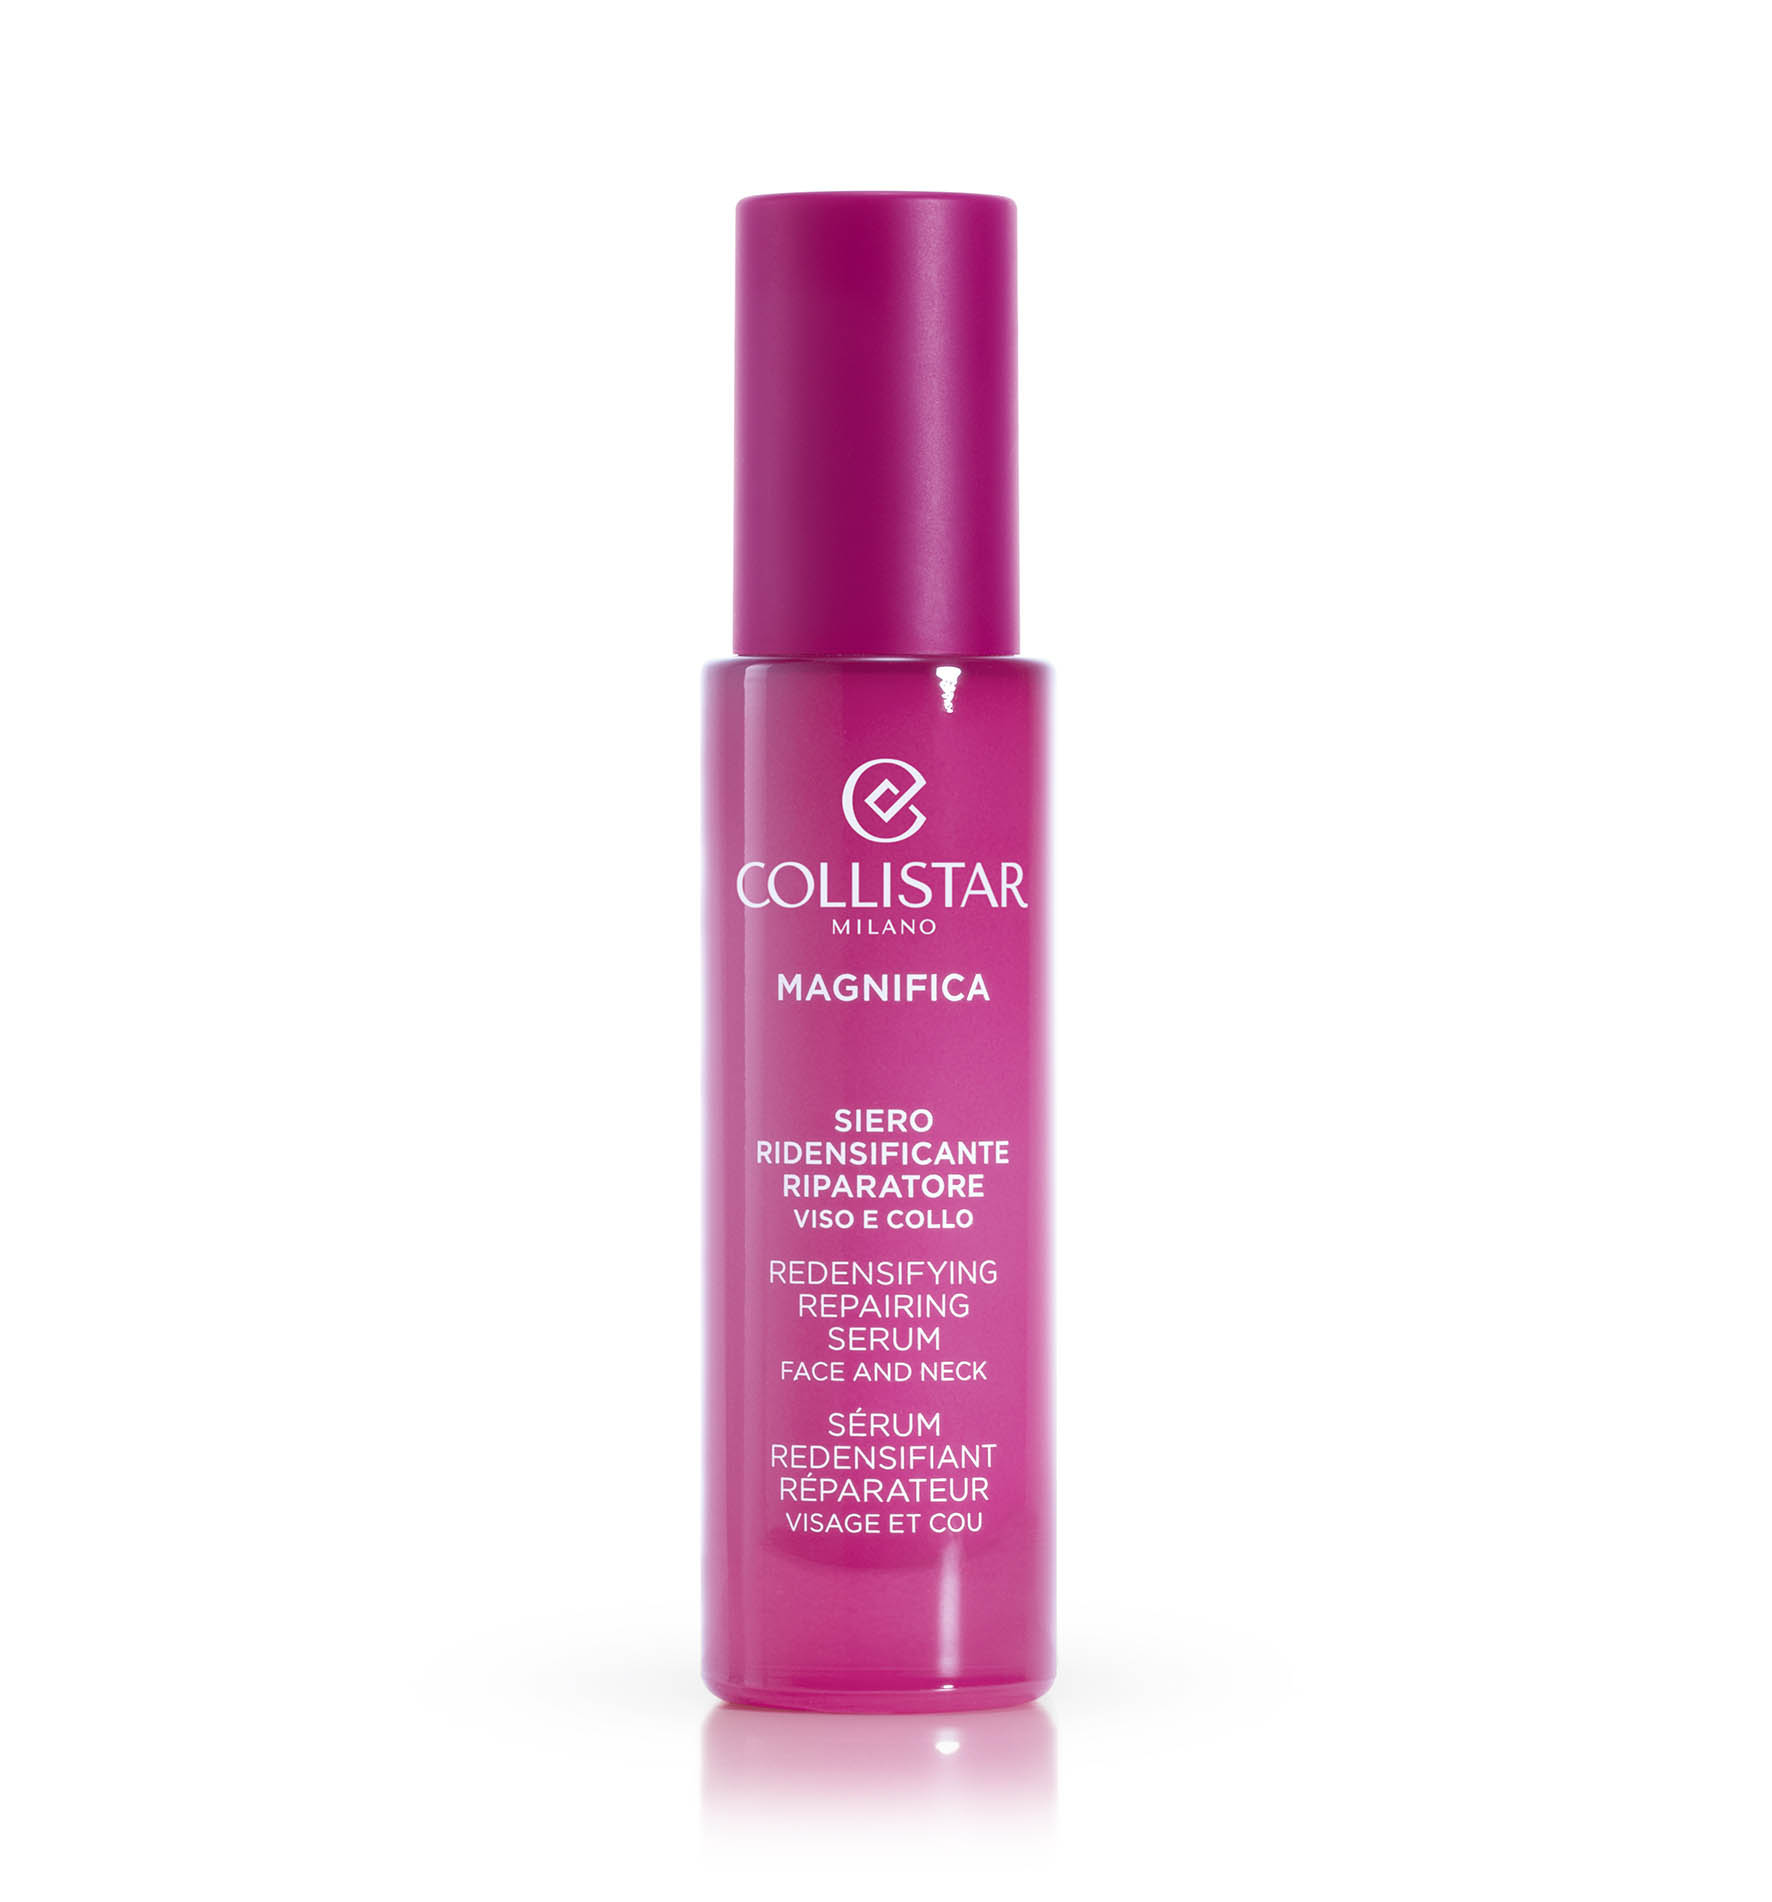 MAGNIFICA REDENSIFYING REPAIRING SERUM FACE AND NECK - San Valentino | Collistar - Shop Online Ufficiale